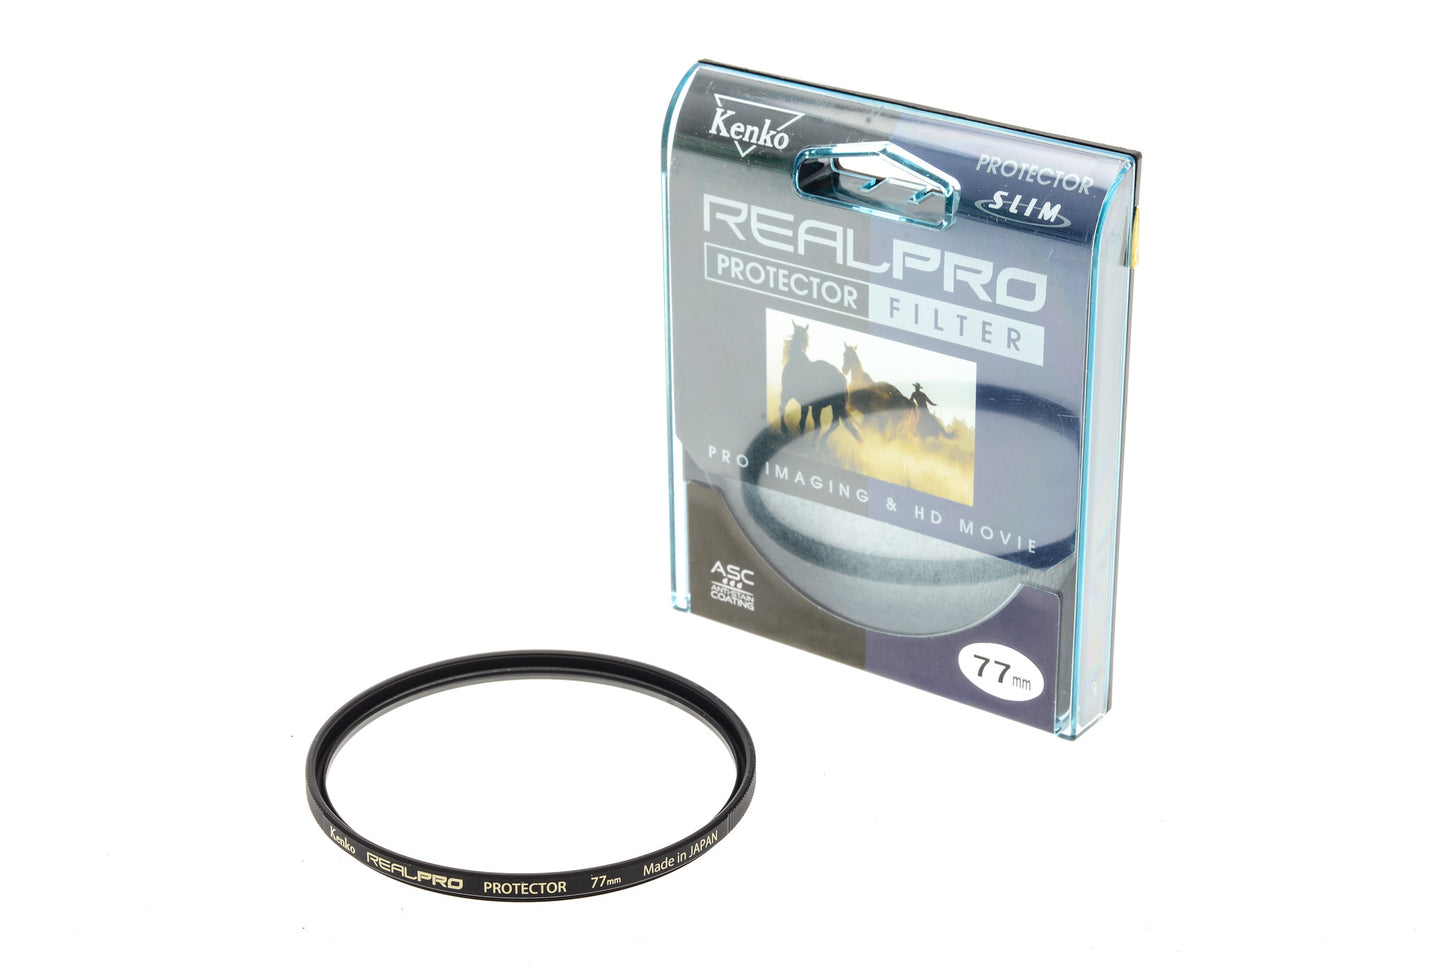 Kenko 77mm Protector Filter RealPro - Accessory